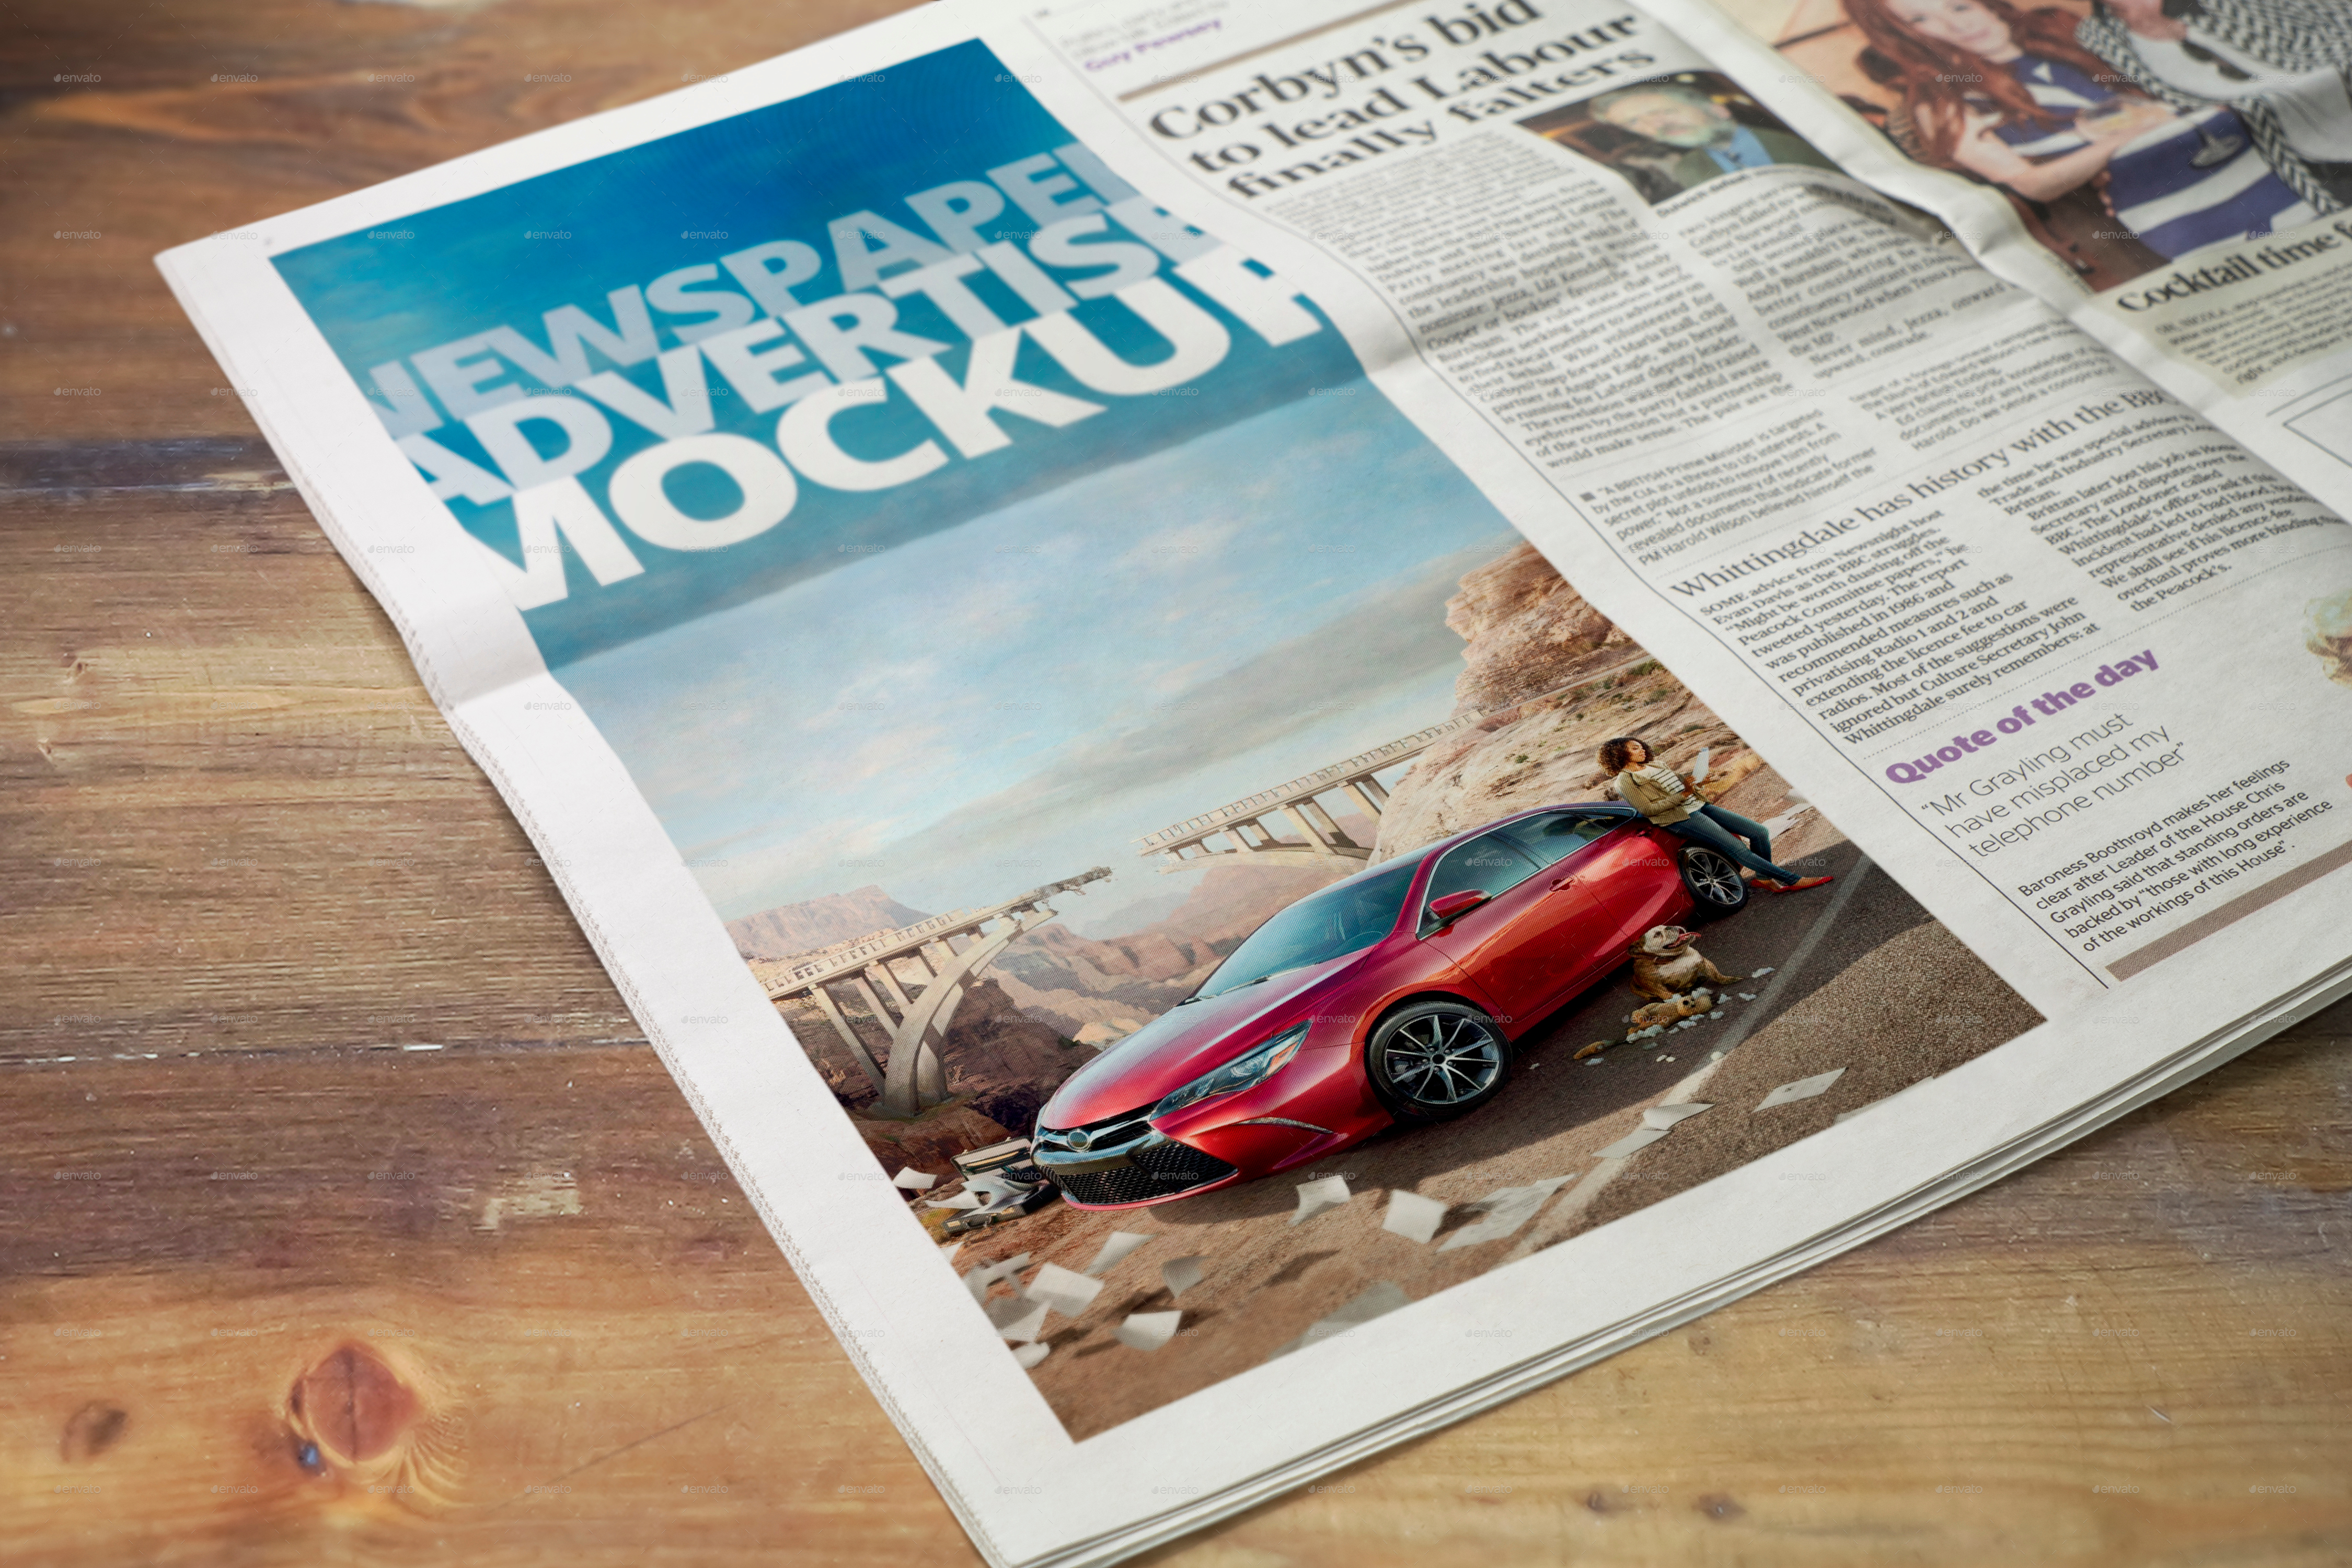 Download Newspaper Advertise Mockup v2 by 2dsight | GraphicRiver